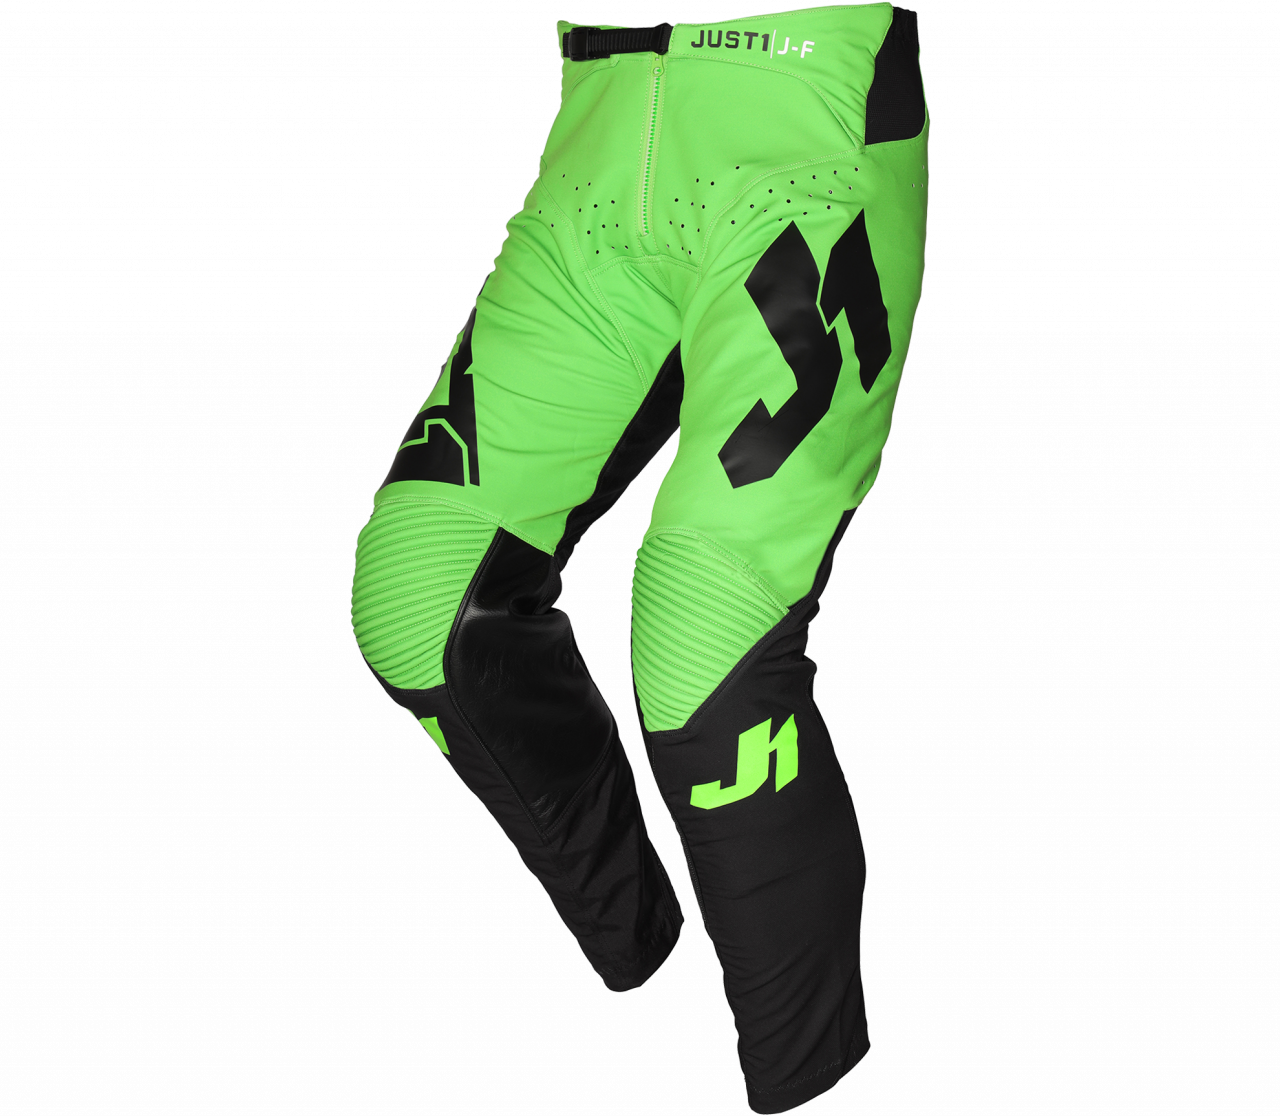 JUST1 PANTS YOUTH J-FLEX ARIA BLACK-FLUO GREEN